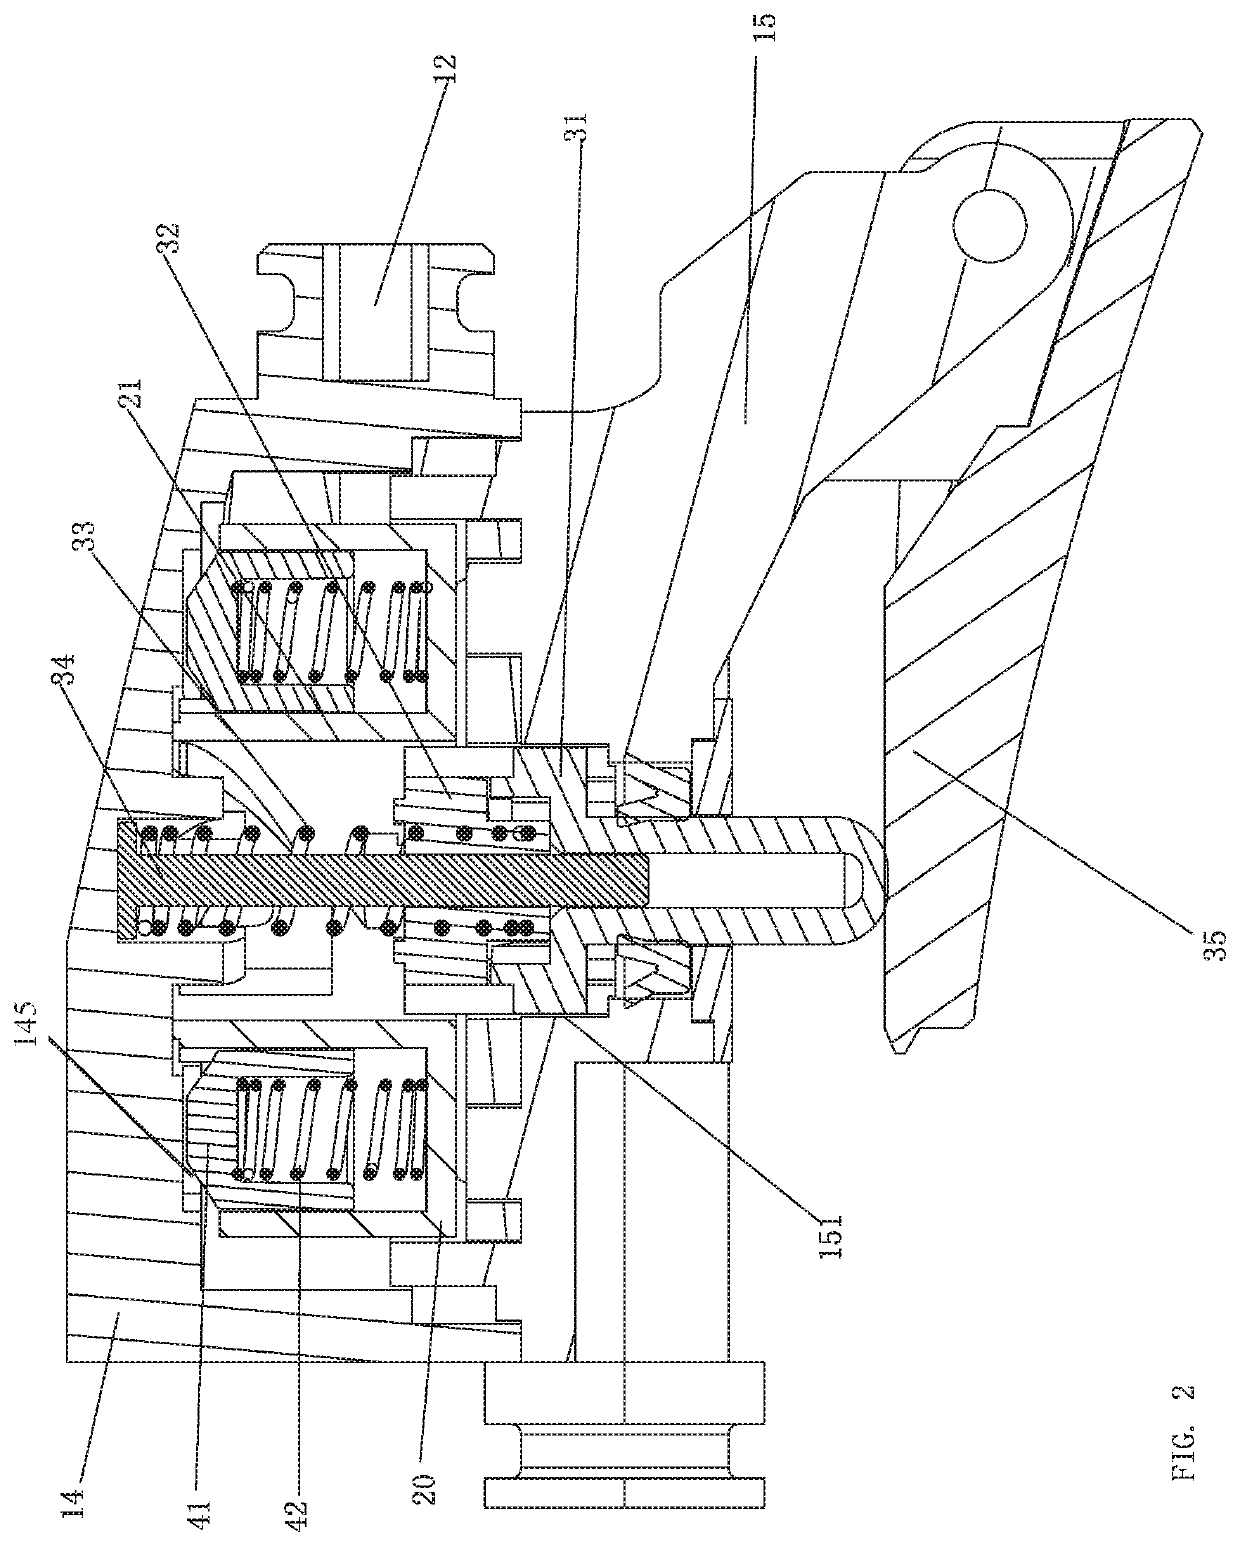 Waterway switching mechanism and method for switching the waterway switching mechanism